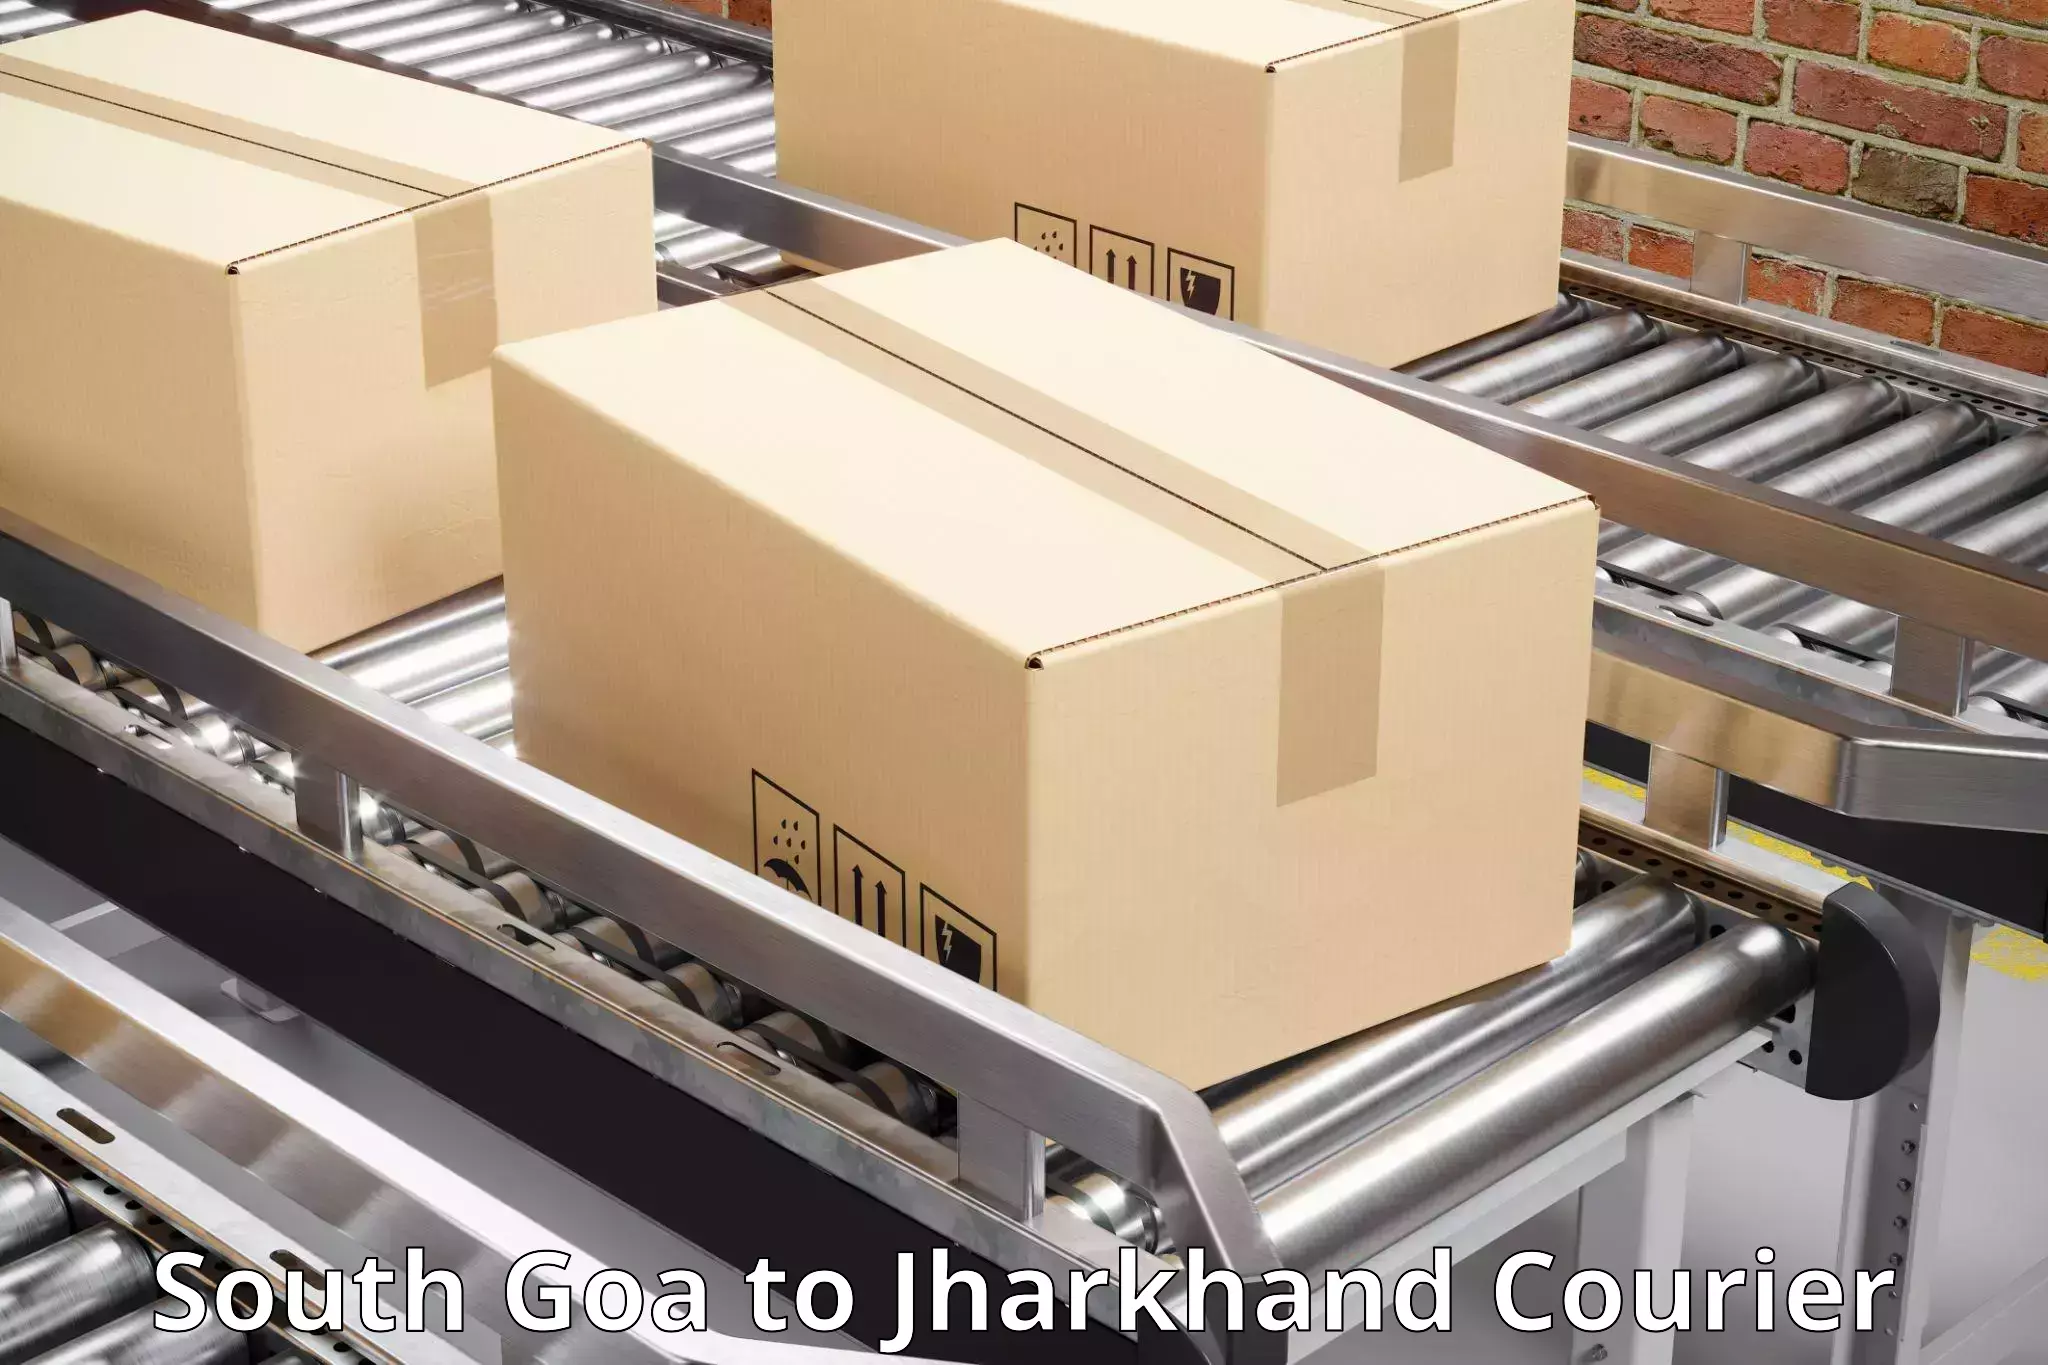 Residential courier service in South Goa to Isri